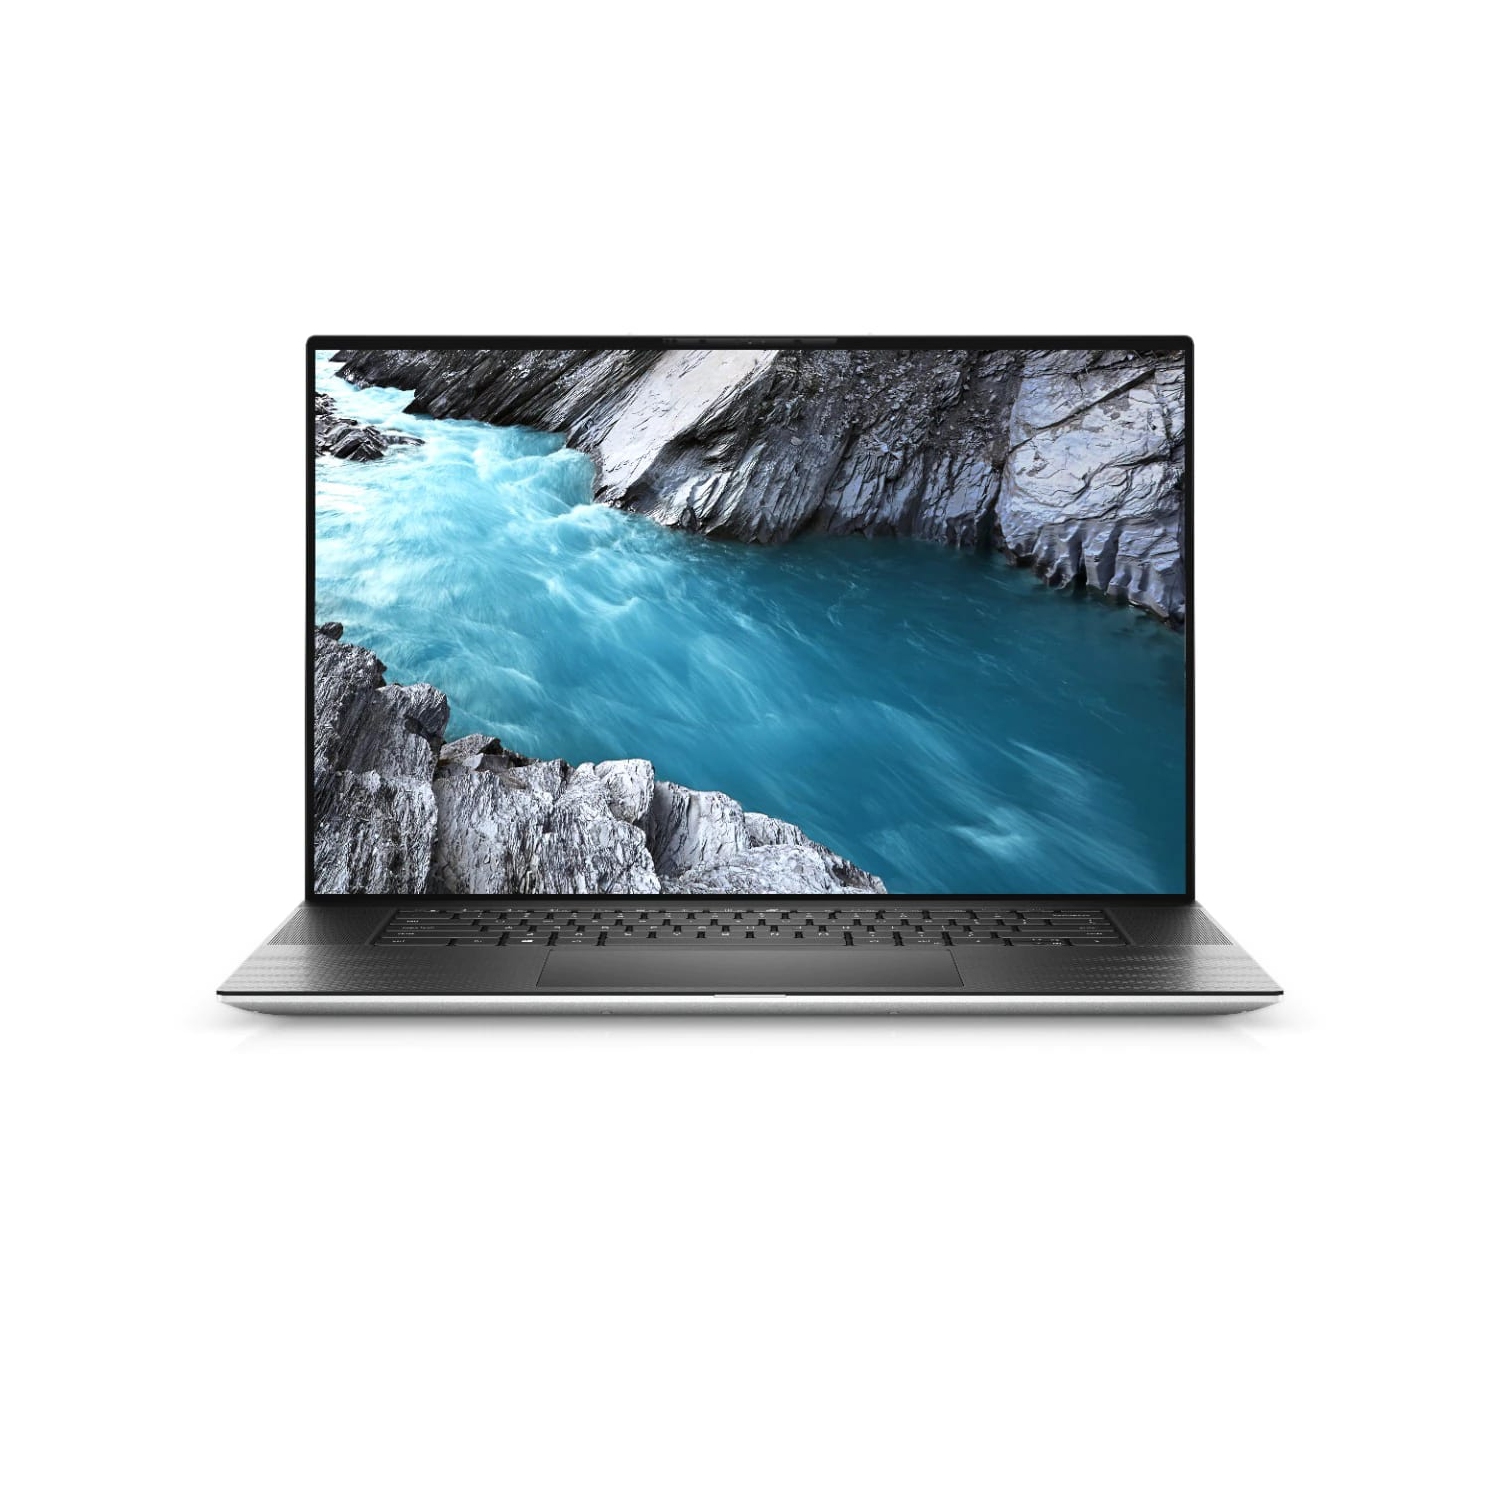 Refurbished (Excellent) - Dell XPS 17 9700 Laptop (2020) | 17" FHD+ | Core i7 - 1TB SSD - 32GB RAM - RTX 2060 | 8 Cores @ 5.1 GHz - 10th Gen CPU Certified Refurbished